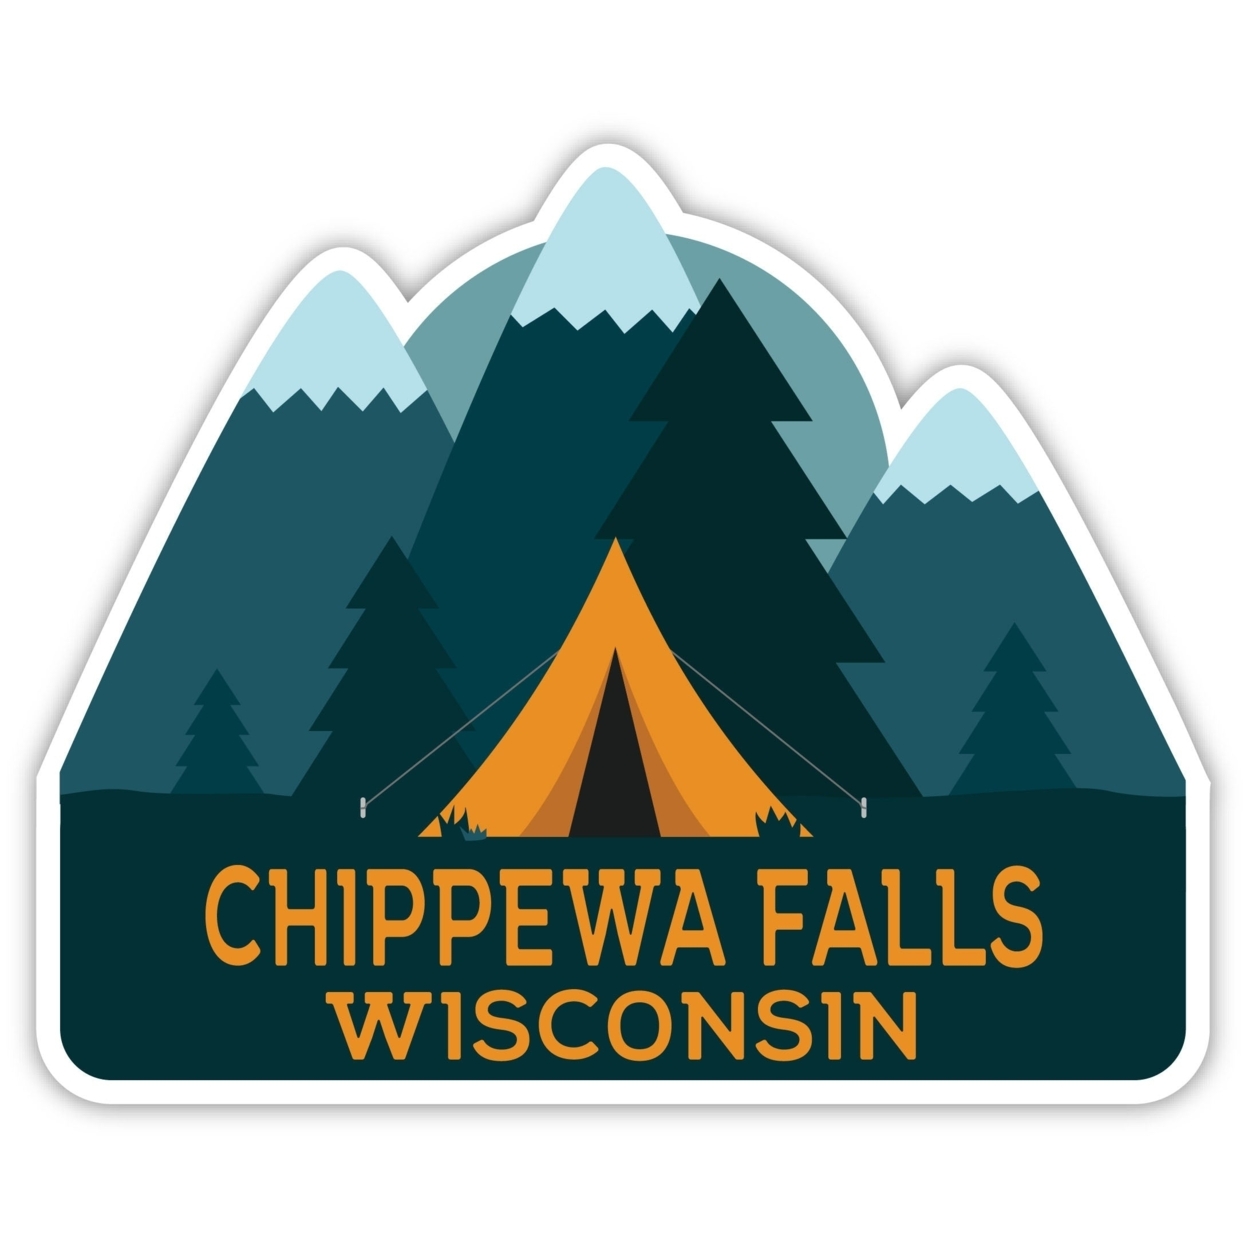 Chippewa Falls Wisconsin Souvenir Decorative Stickers (Choose Theme And Size) - 4-Pack, 10-Inch, Tent